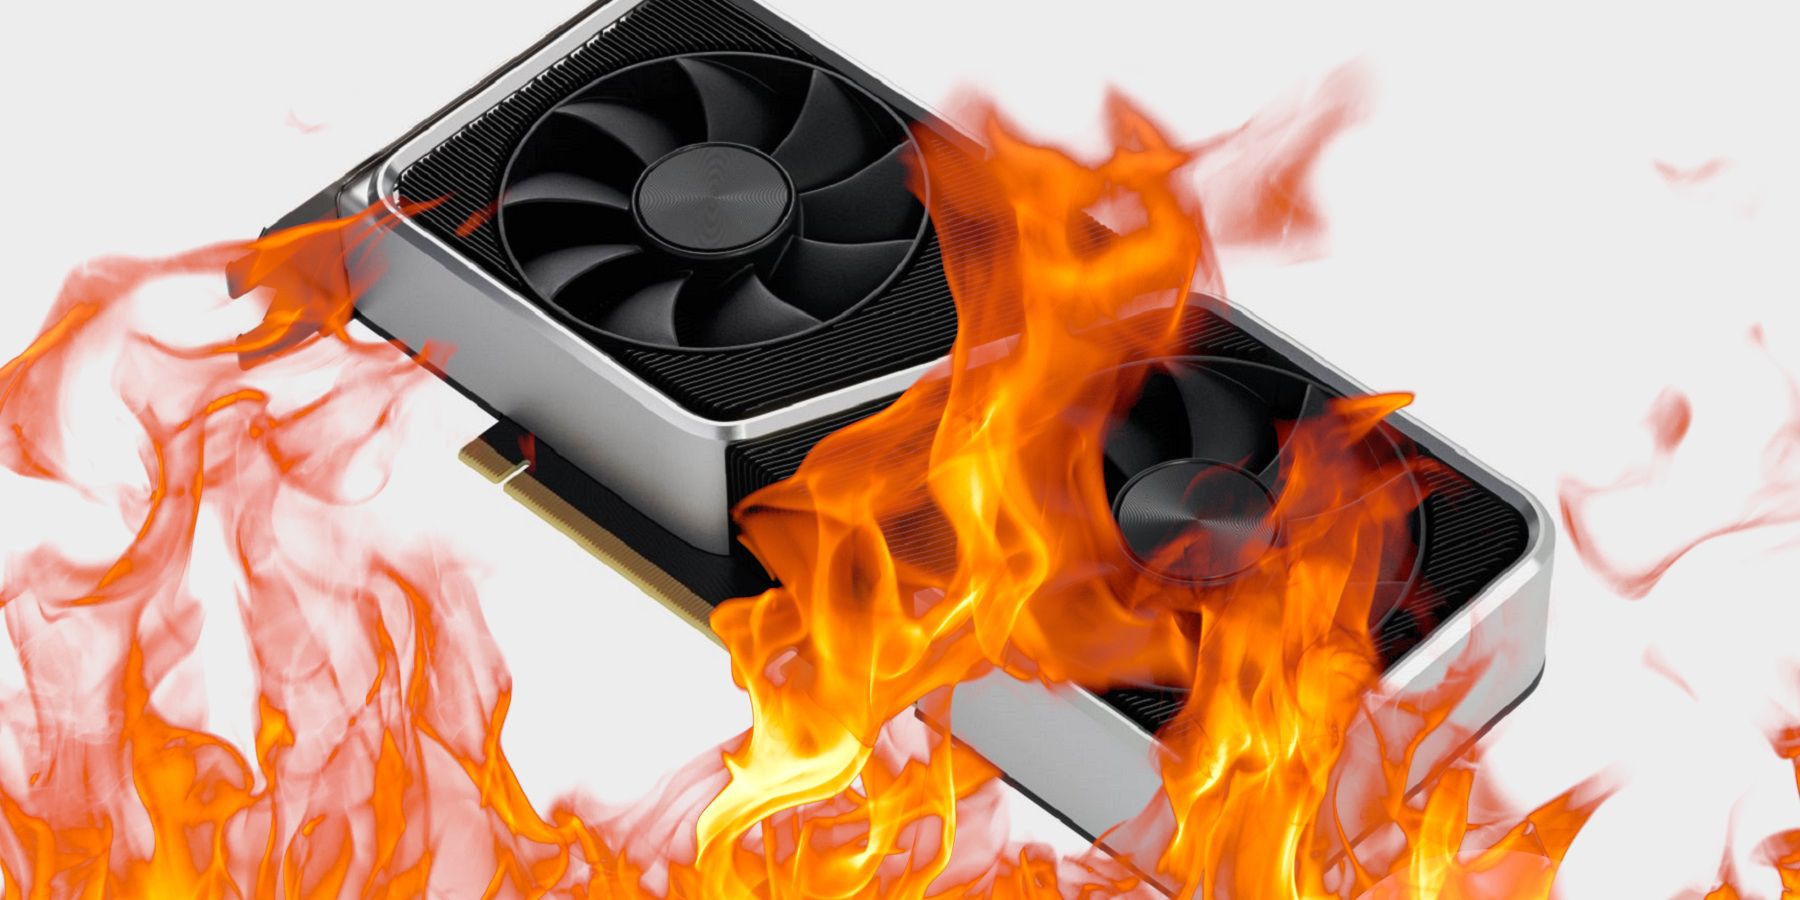 Image of an Nvidia RTX graphics card  with flames in front of it.